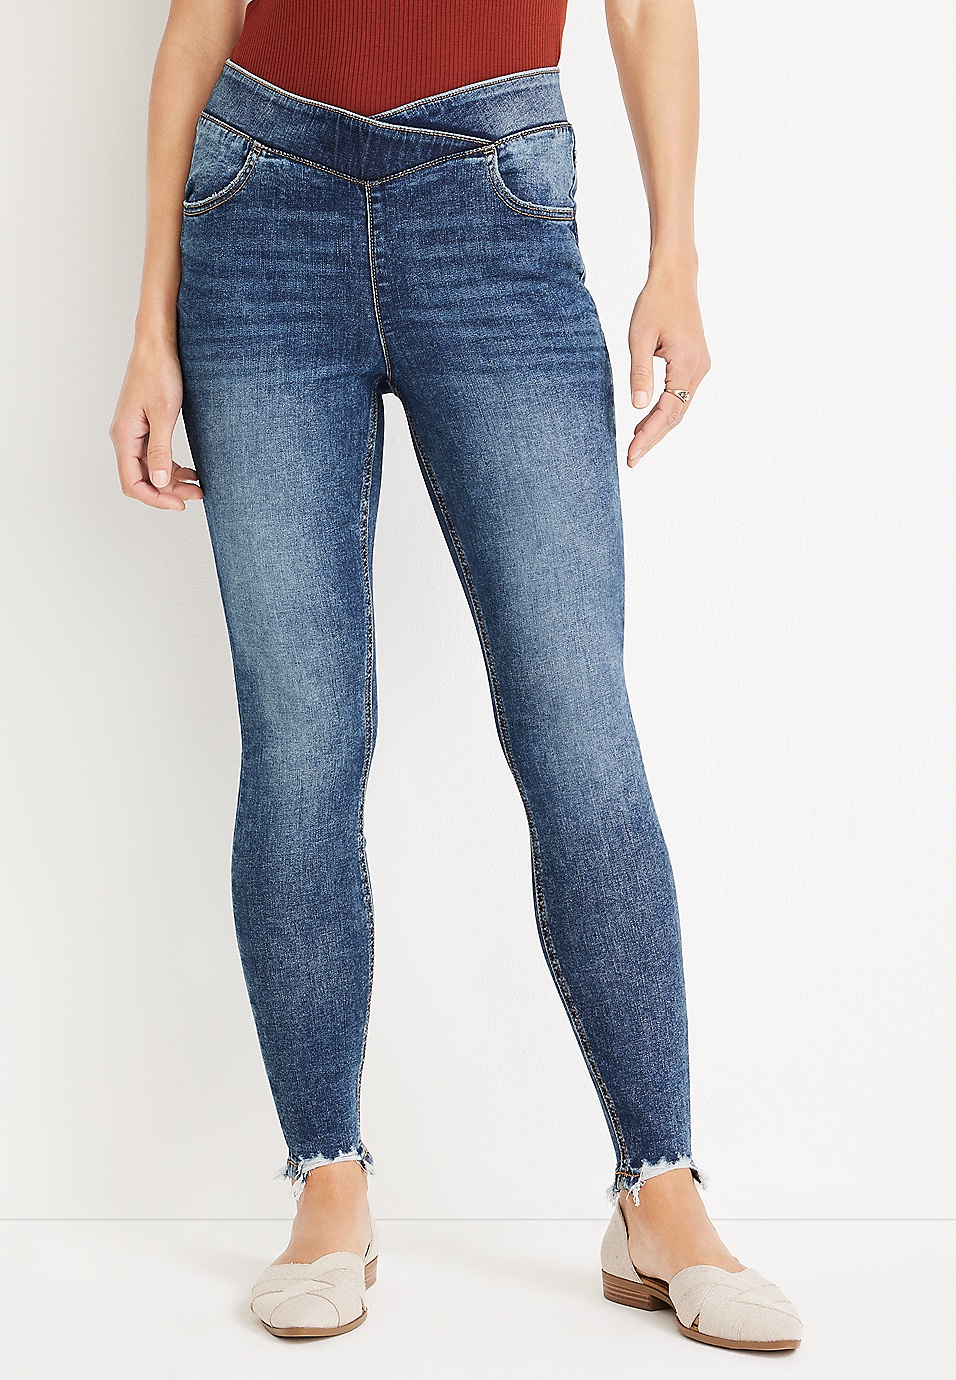 etisk aflevere Saks m jeans by maurices™ Cool Comfort Super Skinny High Rise Crossover Jean |  maurices